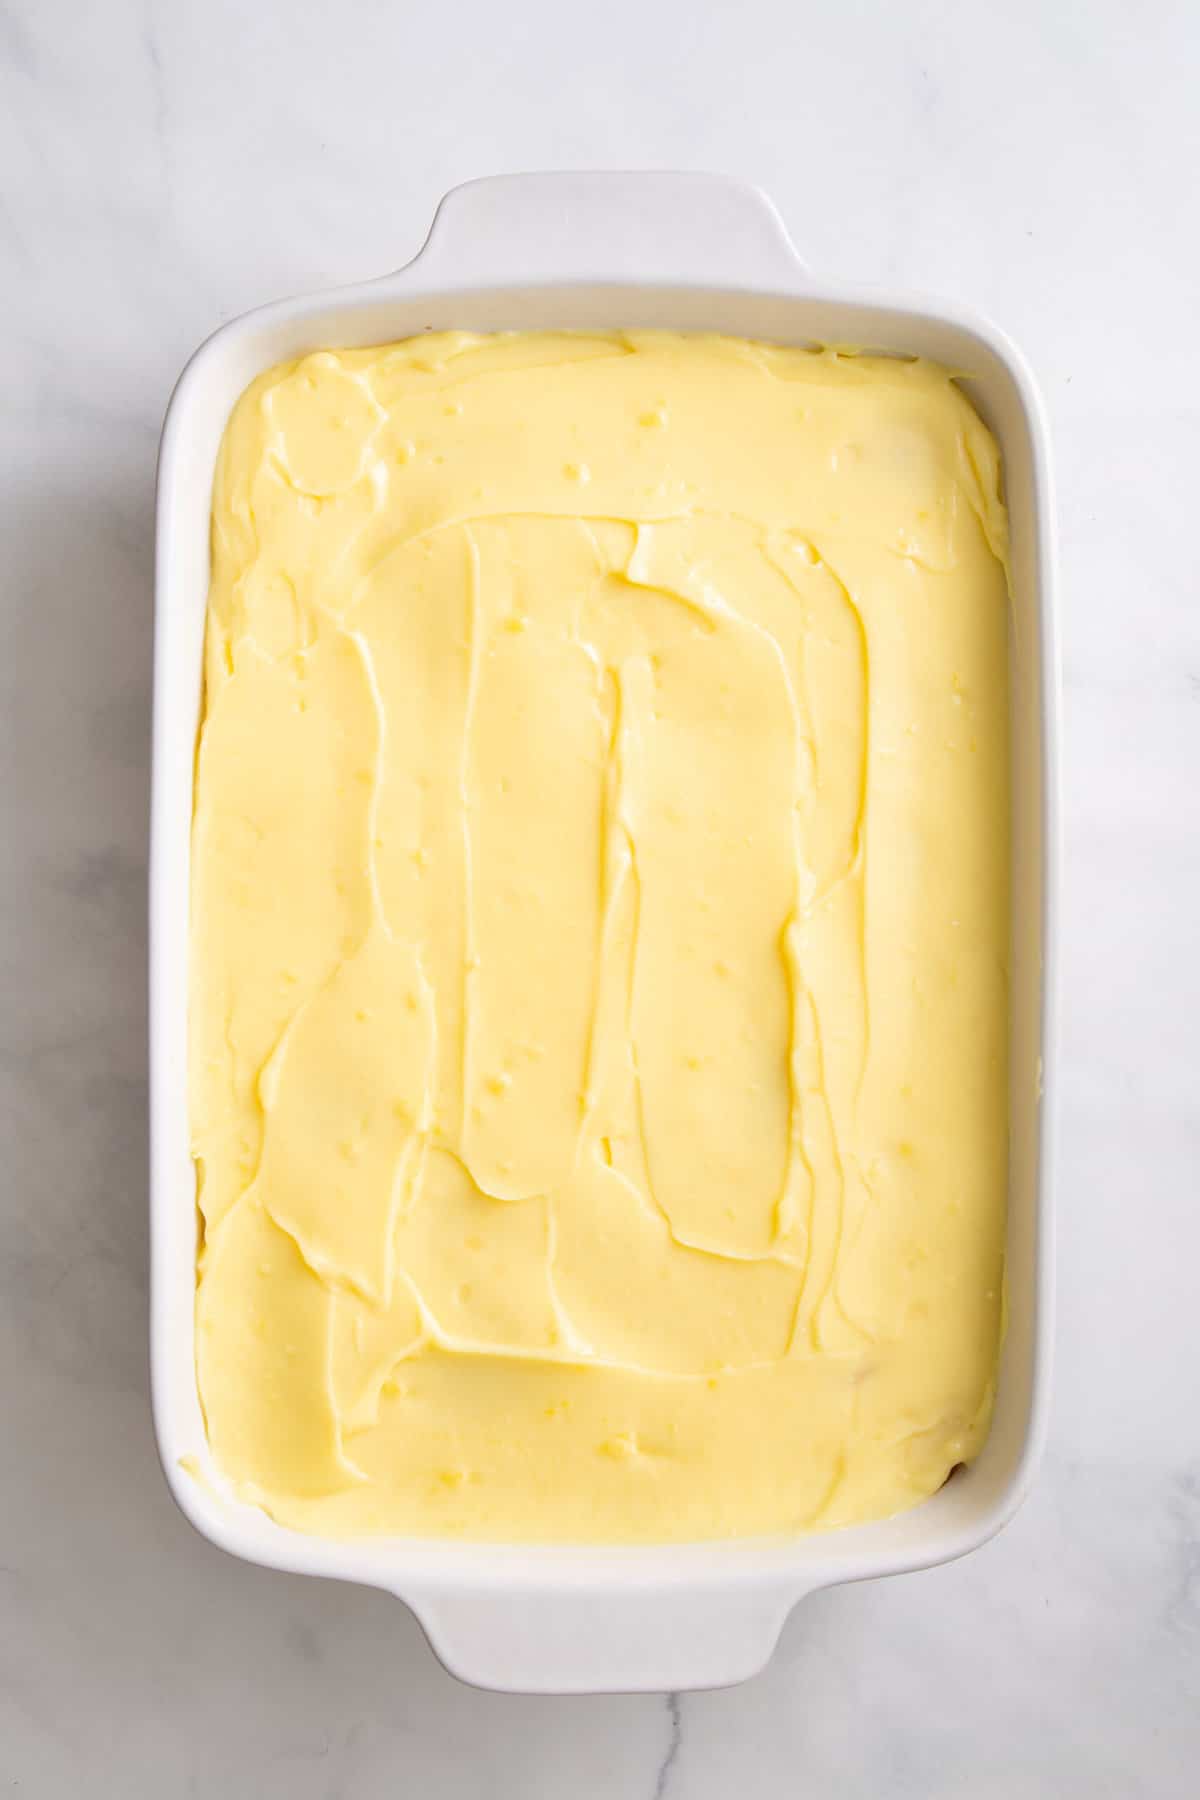 instant banana pudding layered in a 9x13 baking dish